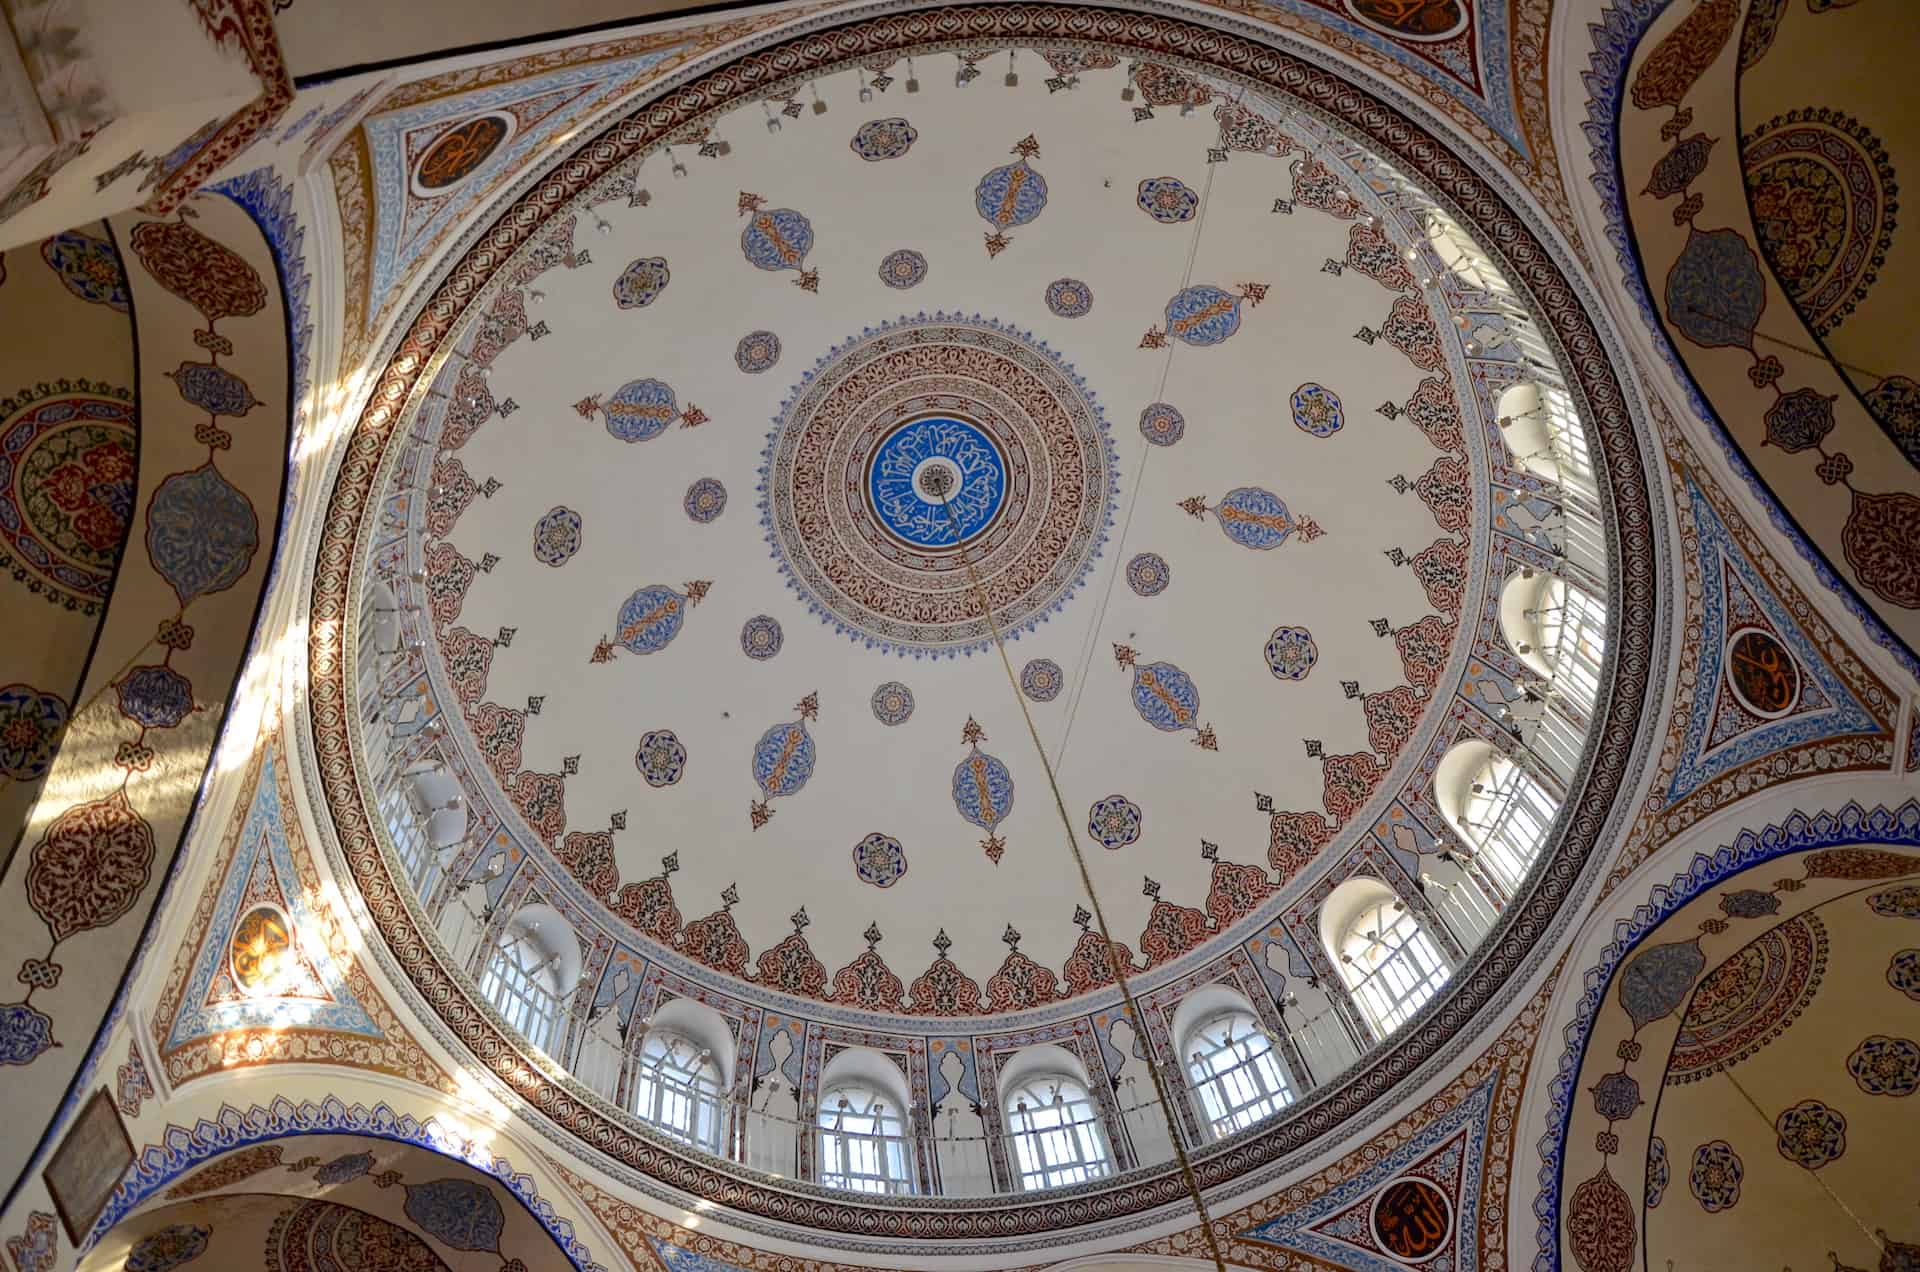 Dome at the Kara Ahmed Pasha Mosque in Topkapı, Istanbul, Turkey